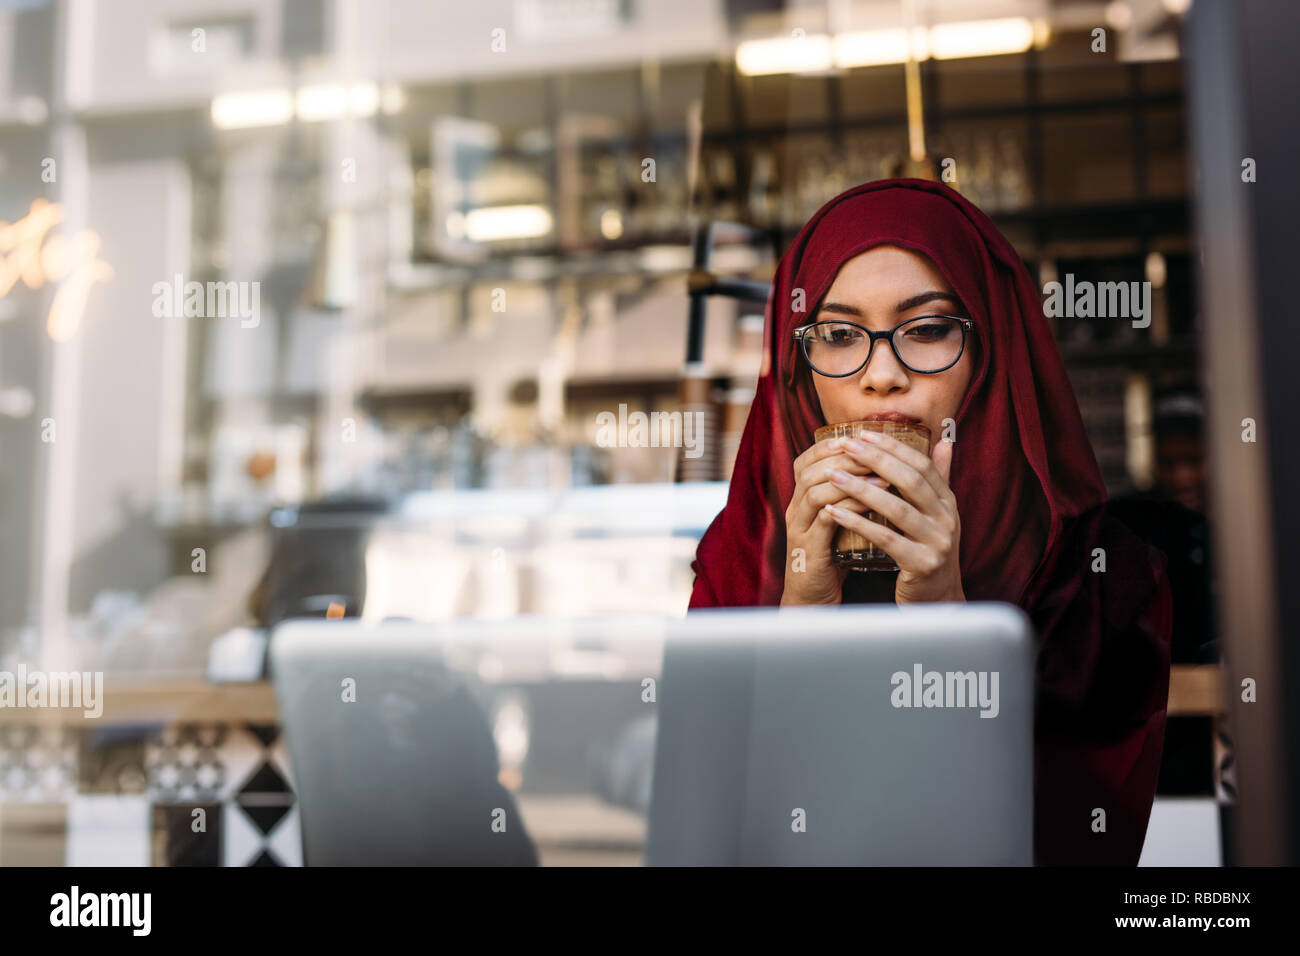 Muslim woman with hijab looking laptop and drinking coffee sitting at cafe. Islamic female having morning coffee at cafe and using laptop computer. Stock Photo